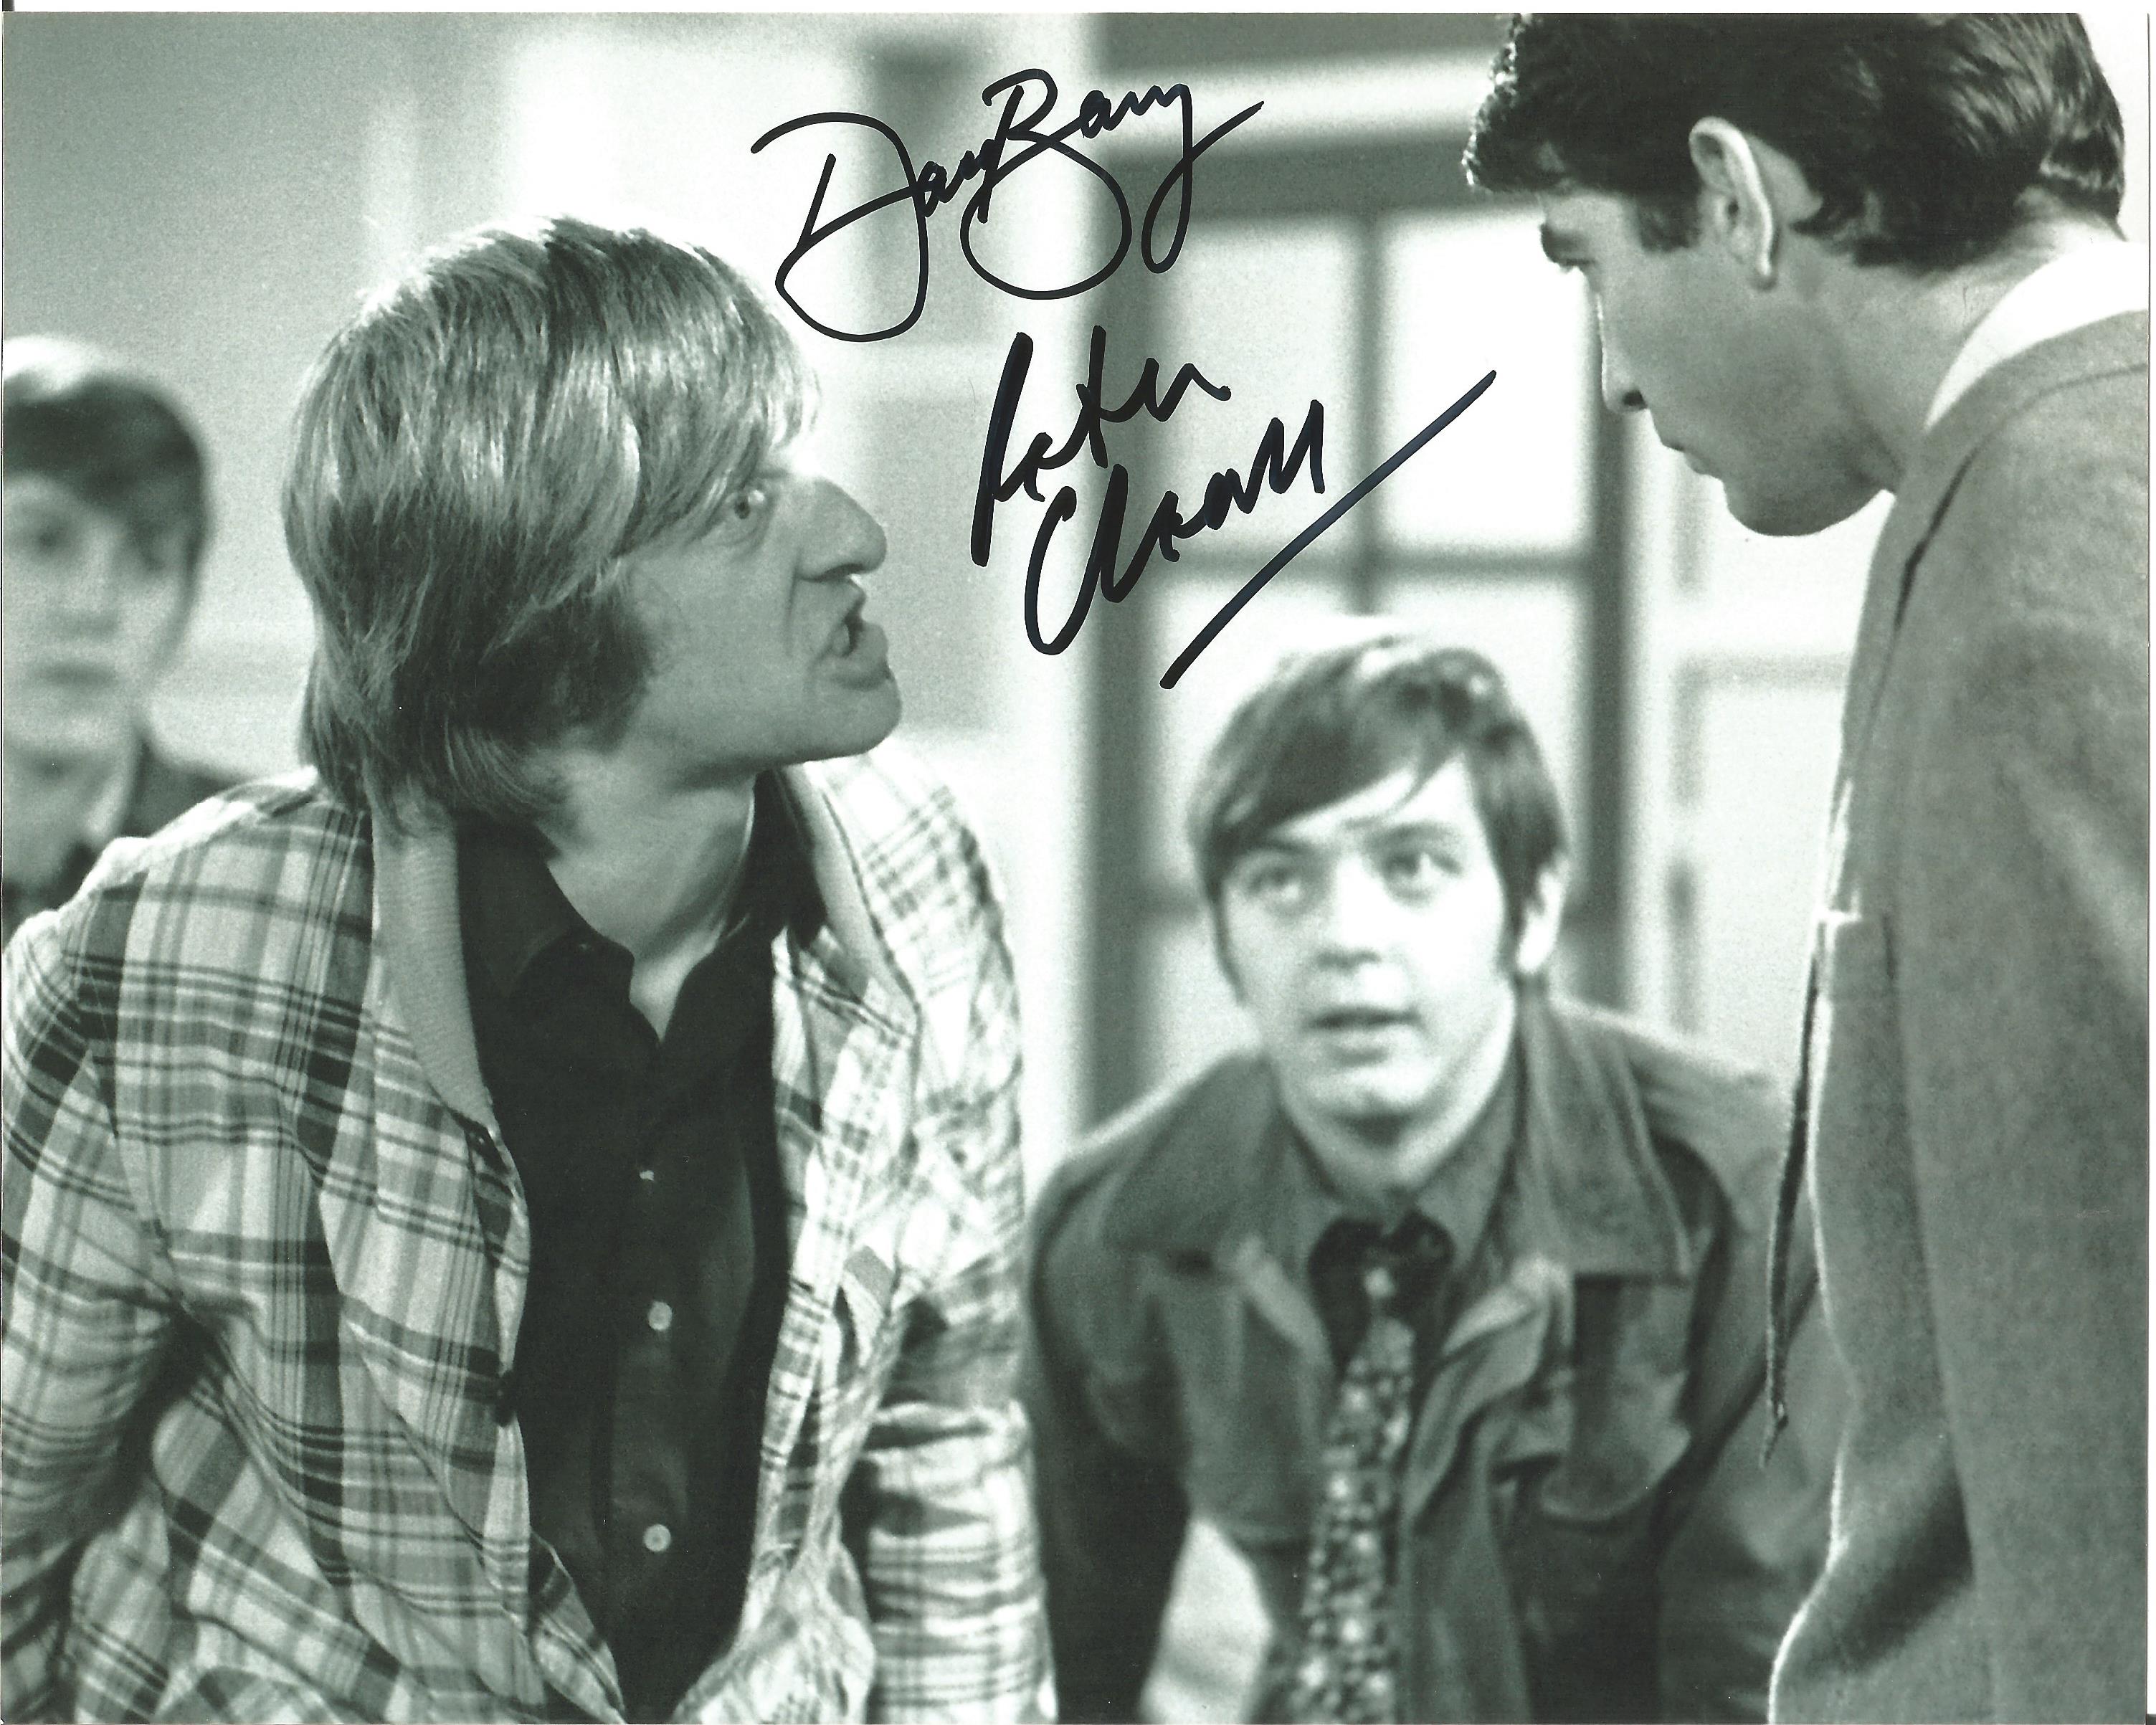 David Barry & Peter Cleal Please Sir cast authentic signed 10x8 b/w photo. Good Condition. All